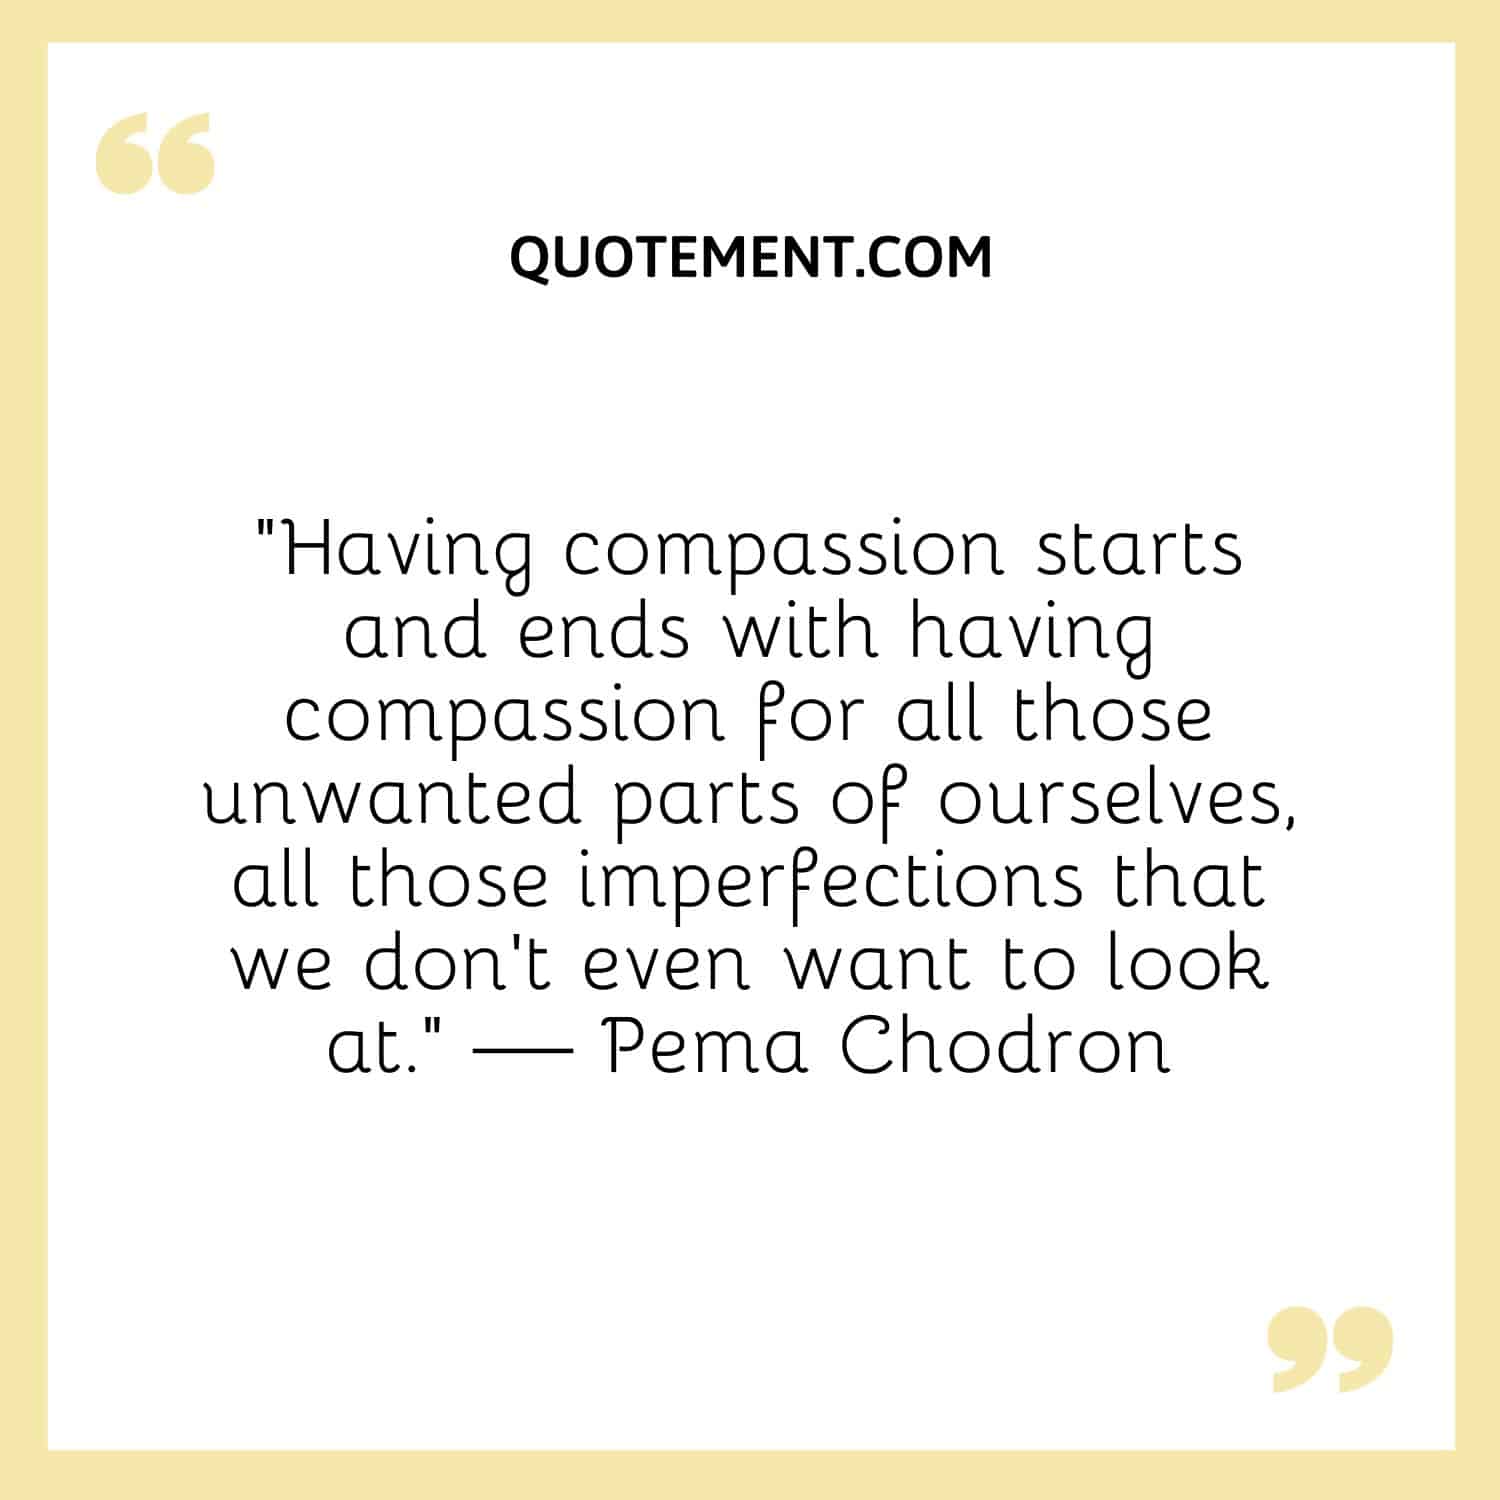 Having compassion starts and ends with having compassion for all those unwanted parts of ourselves, all those imperfections that we don't even want to look at